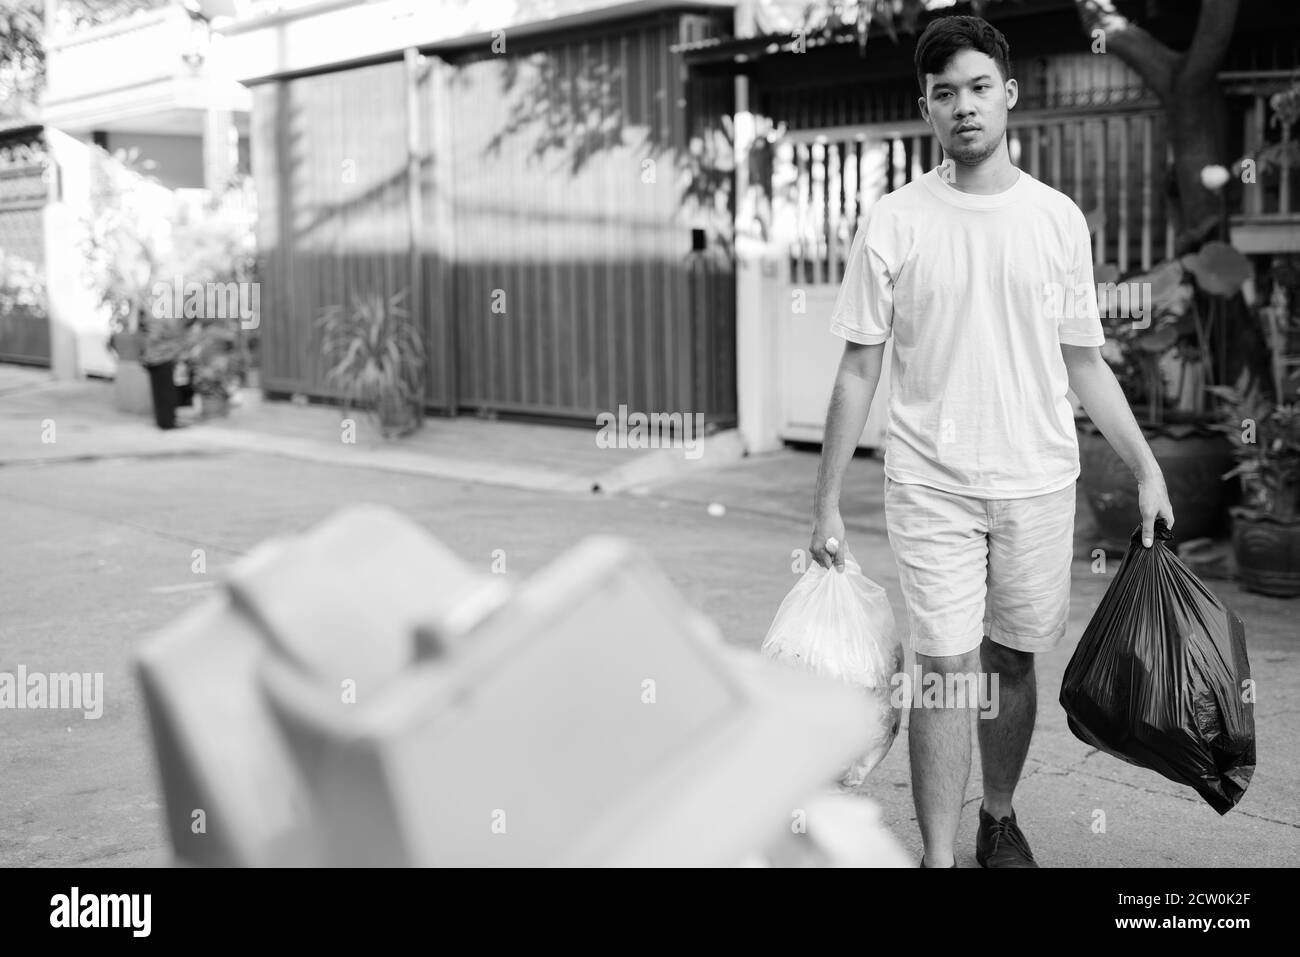 Young Asian man taking out the garbage at home Stock Photo